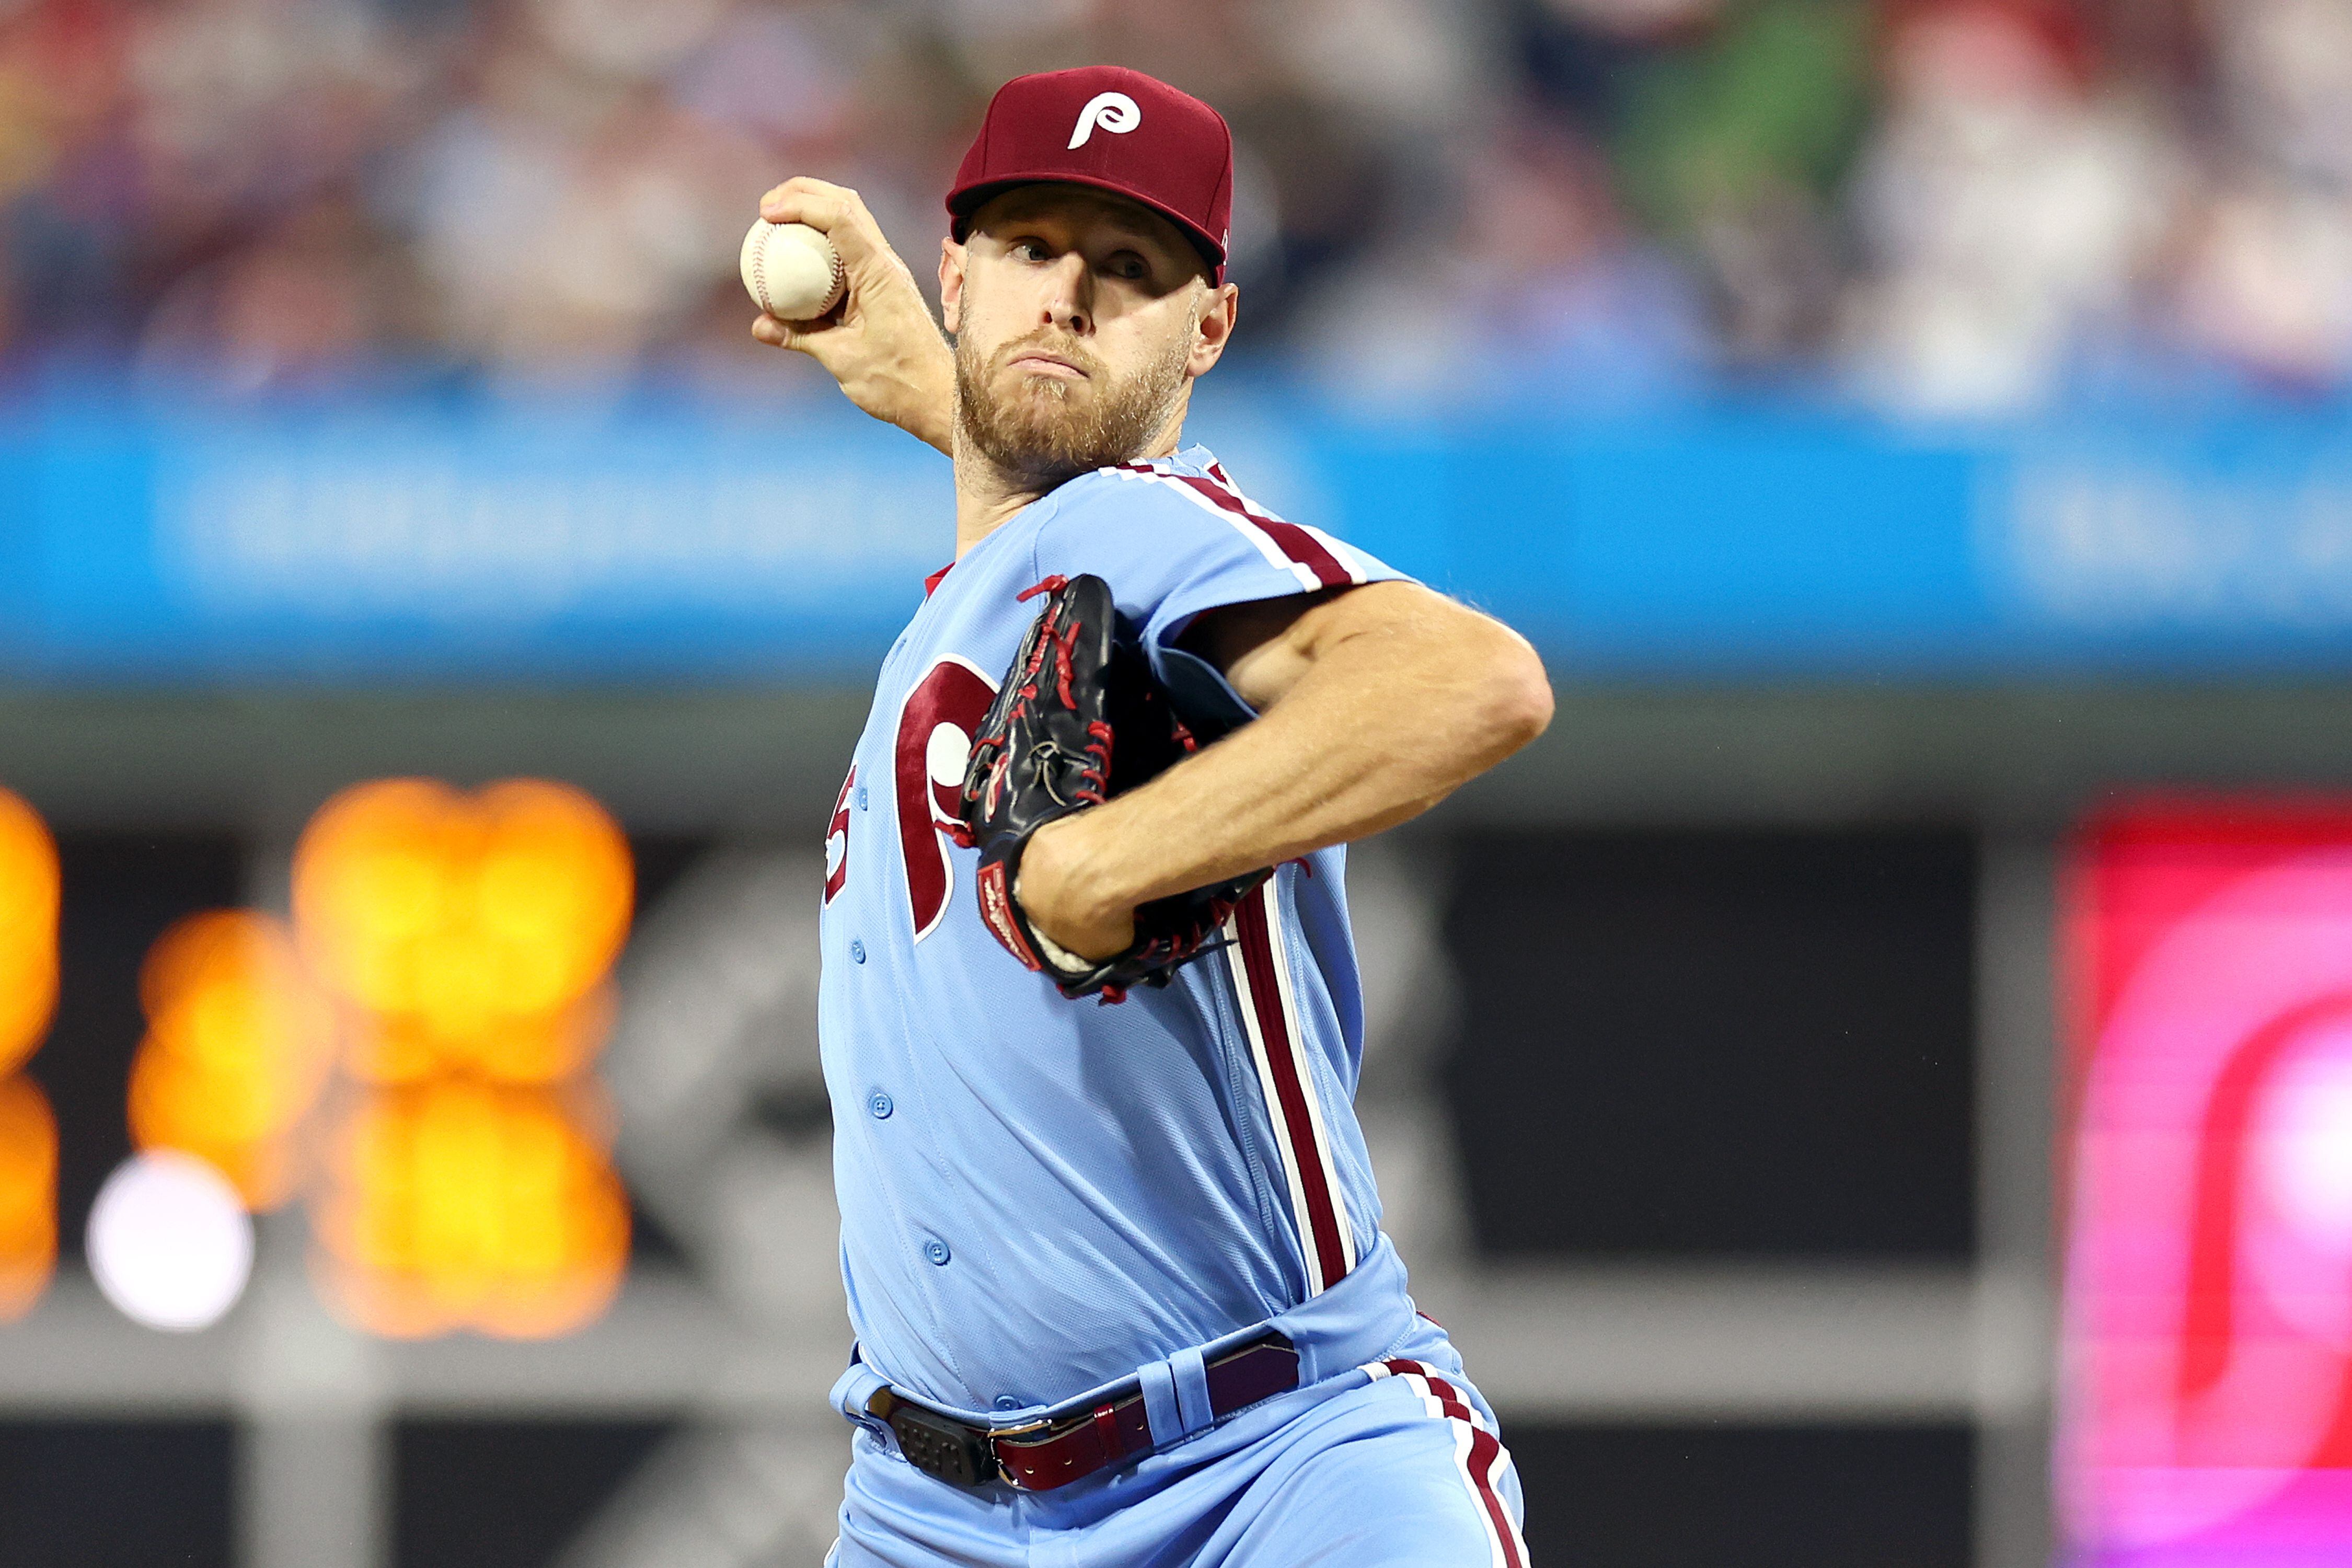 Marlins vs. Phillies prediction, betting odds for MLB on Tuesday